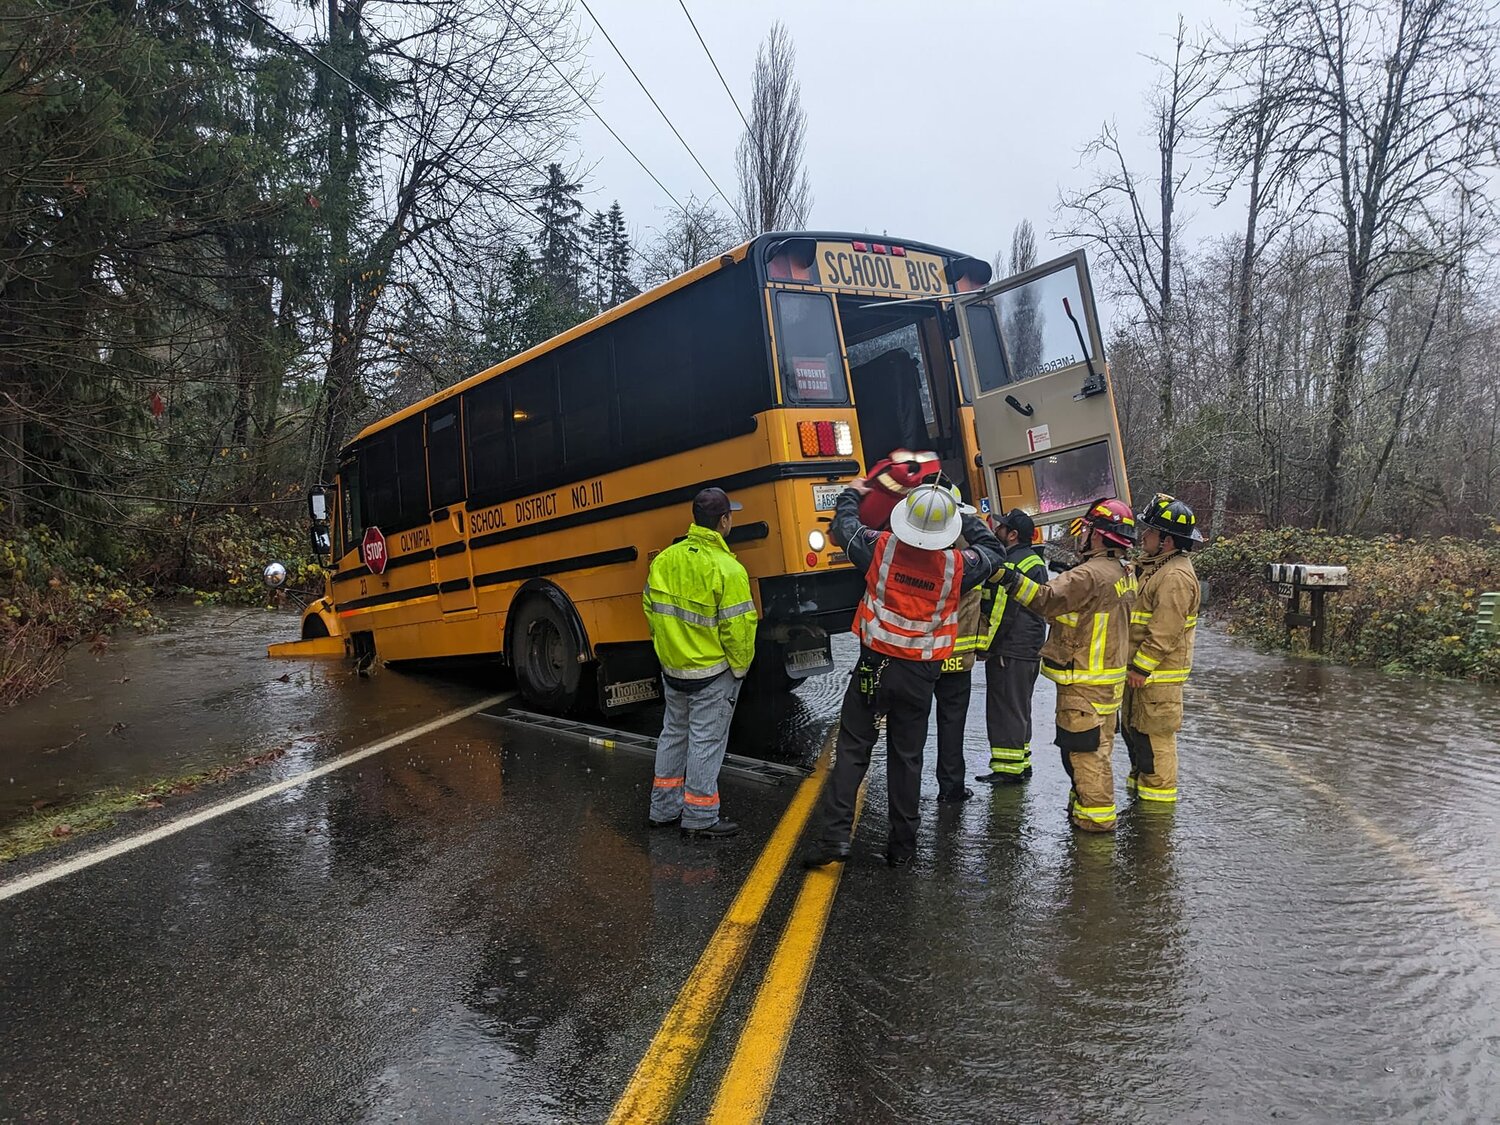 Firefighters helped rescue students from a bus that got stuck in flood waters northwest of Black Lake Tuesday morning.